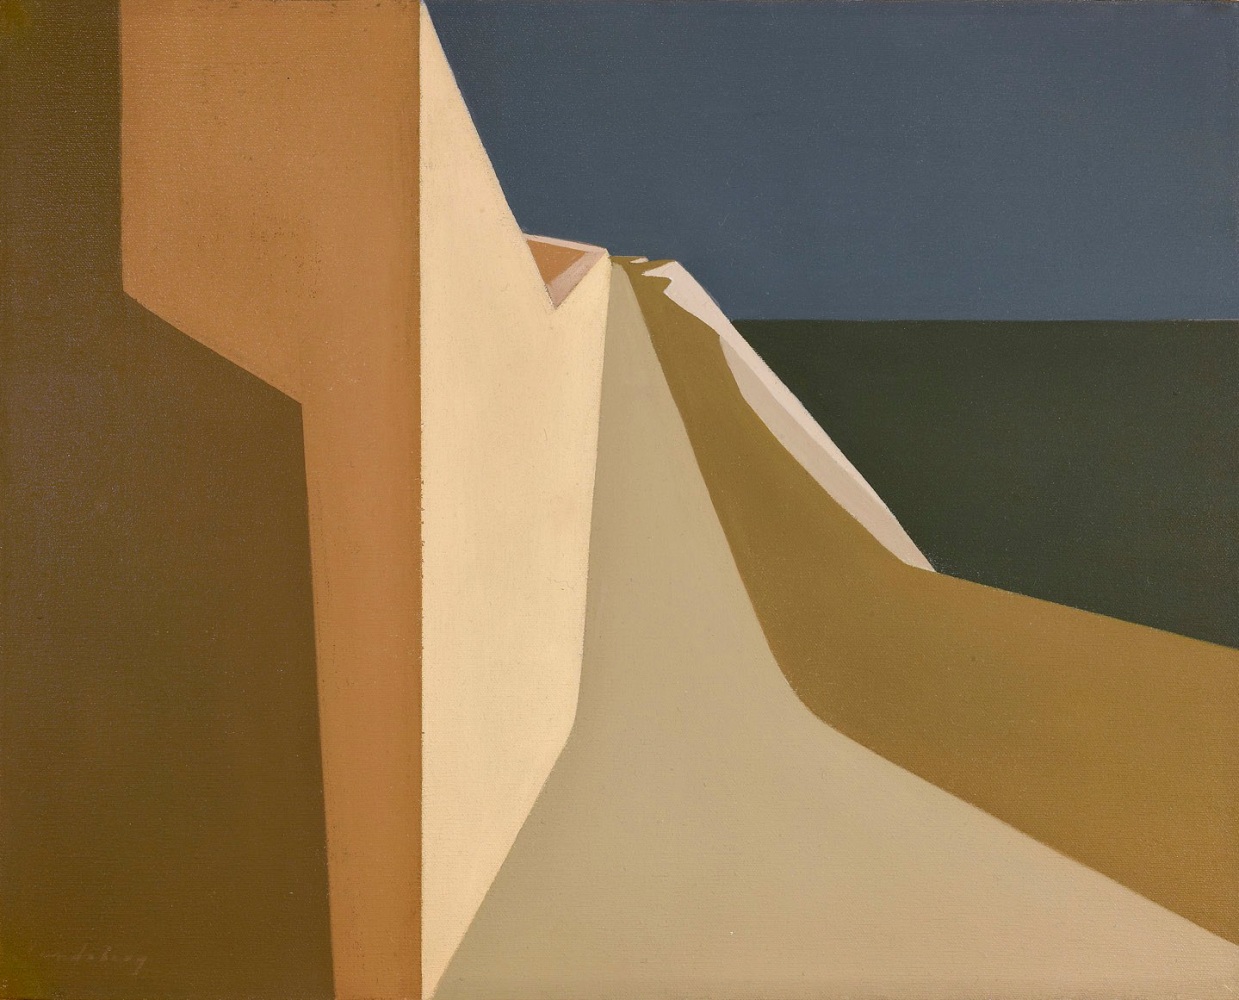 Helen Lundeberg (1908-1999)

Light Path to the Sea, 1959

oil on canvas

16 x 20 inches; 40.6 x 50.8 centimeters

LSFA# 11921